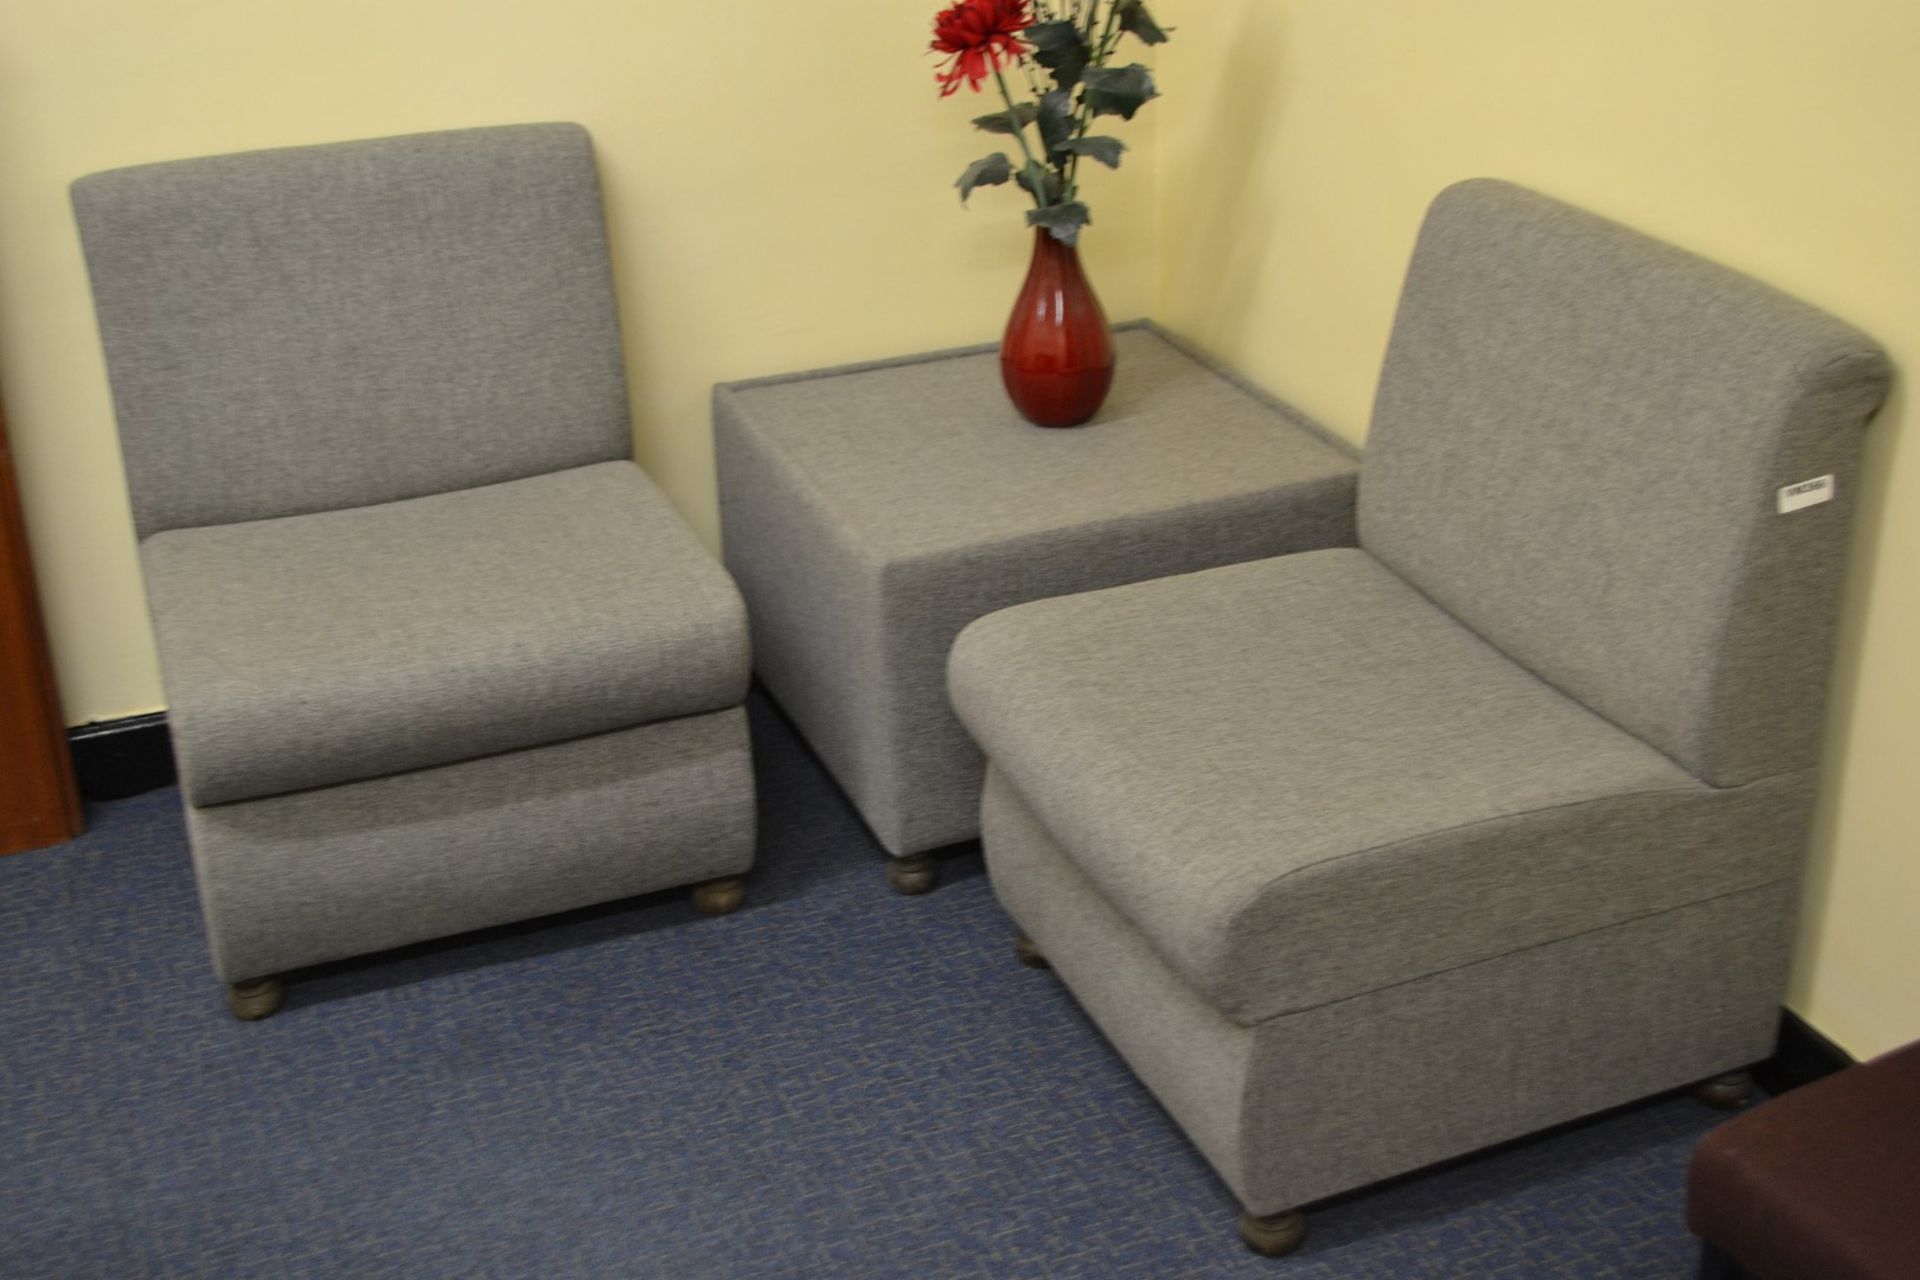 A Set Of Grey Fabric Sofa Seats and A Matching Coffee Table - Ref: VM366 - CL409 - Location: WF16